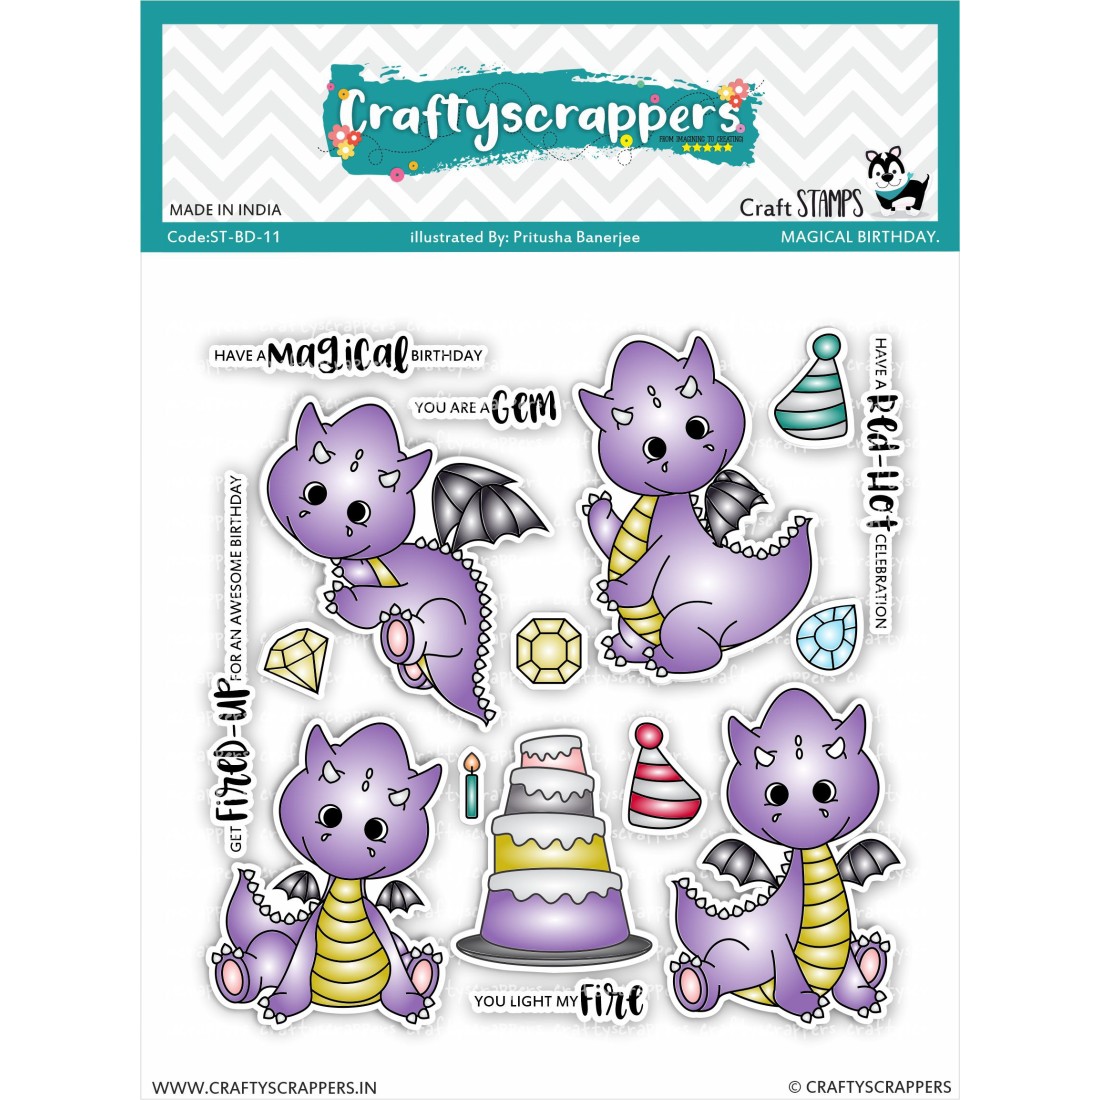 Craftyscrappers Stamps- MAGICAL BIRTHDAY